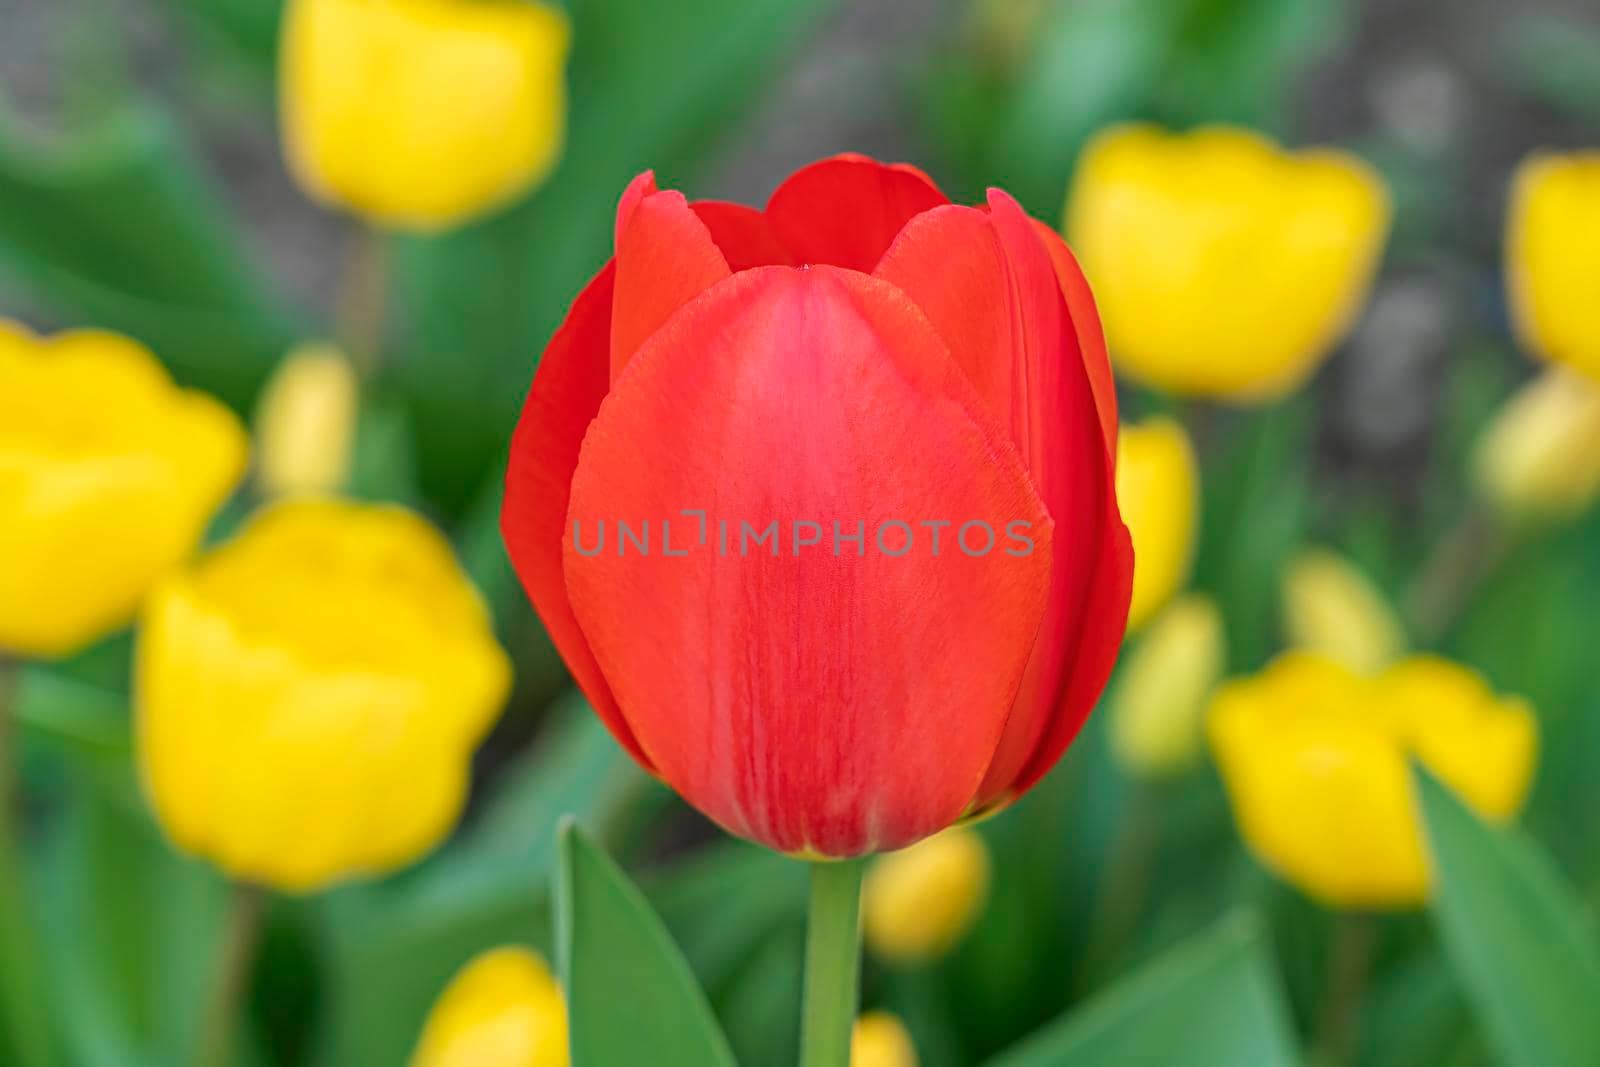 red tulip on a background of yellow tulips by roman112007